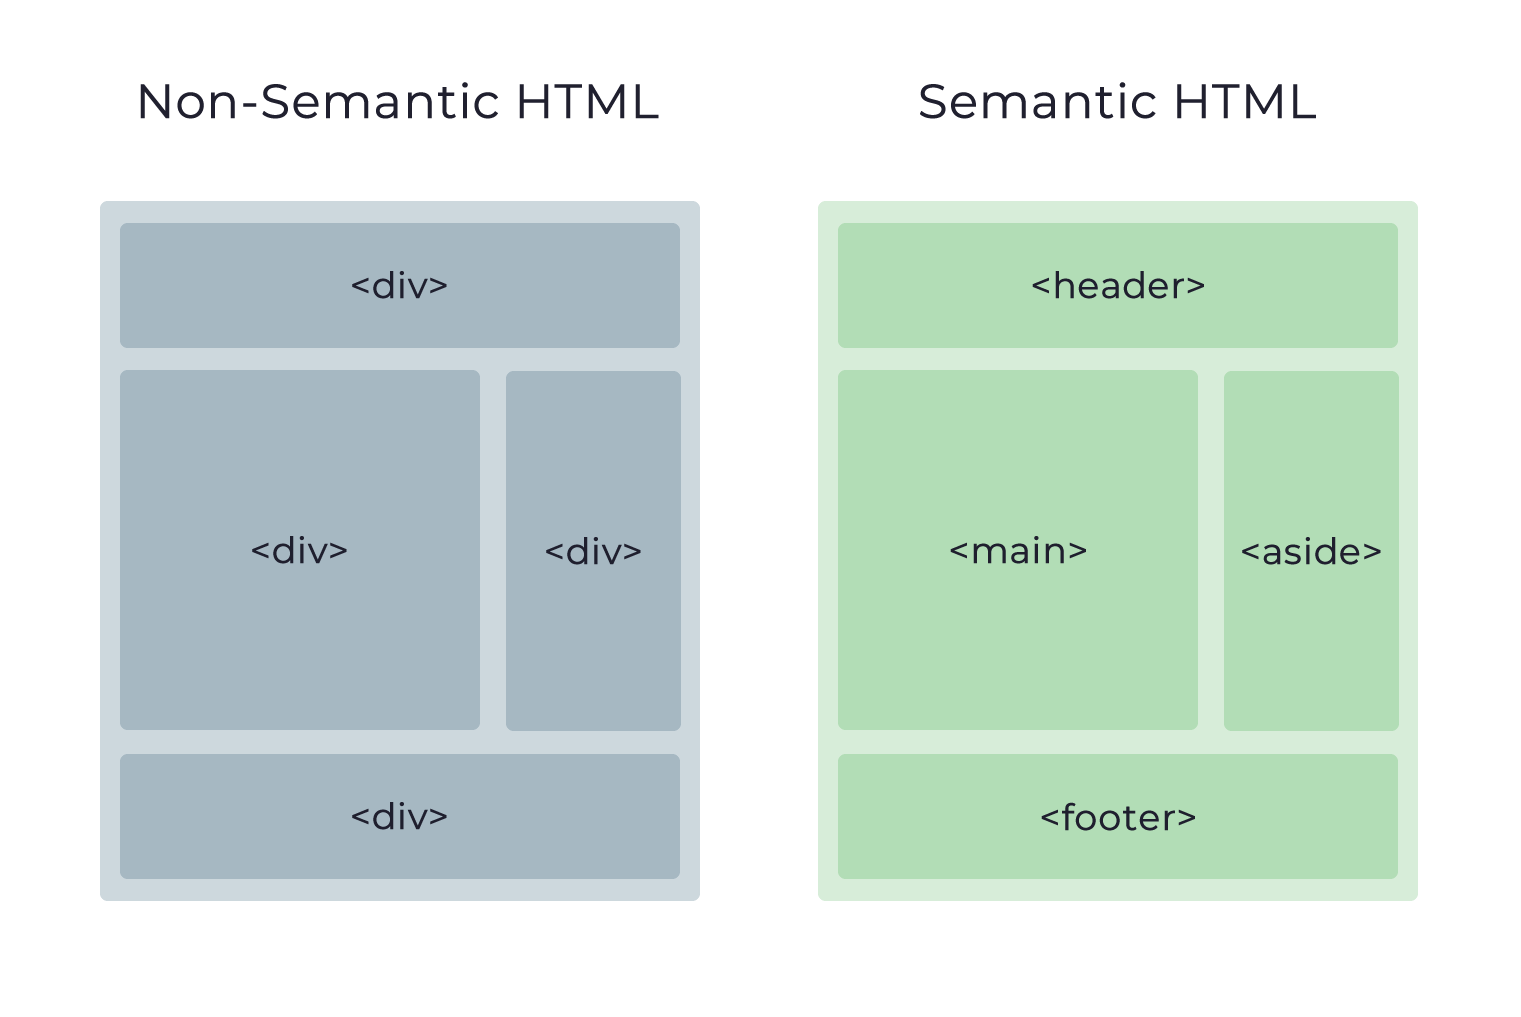 Graphic showing the difference between semantic HTML and non-semantic HTML.